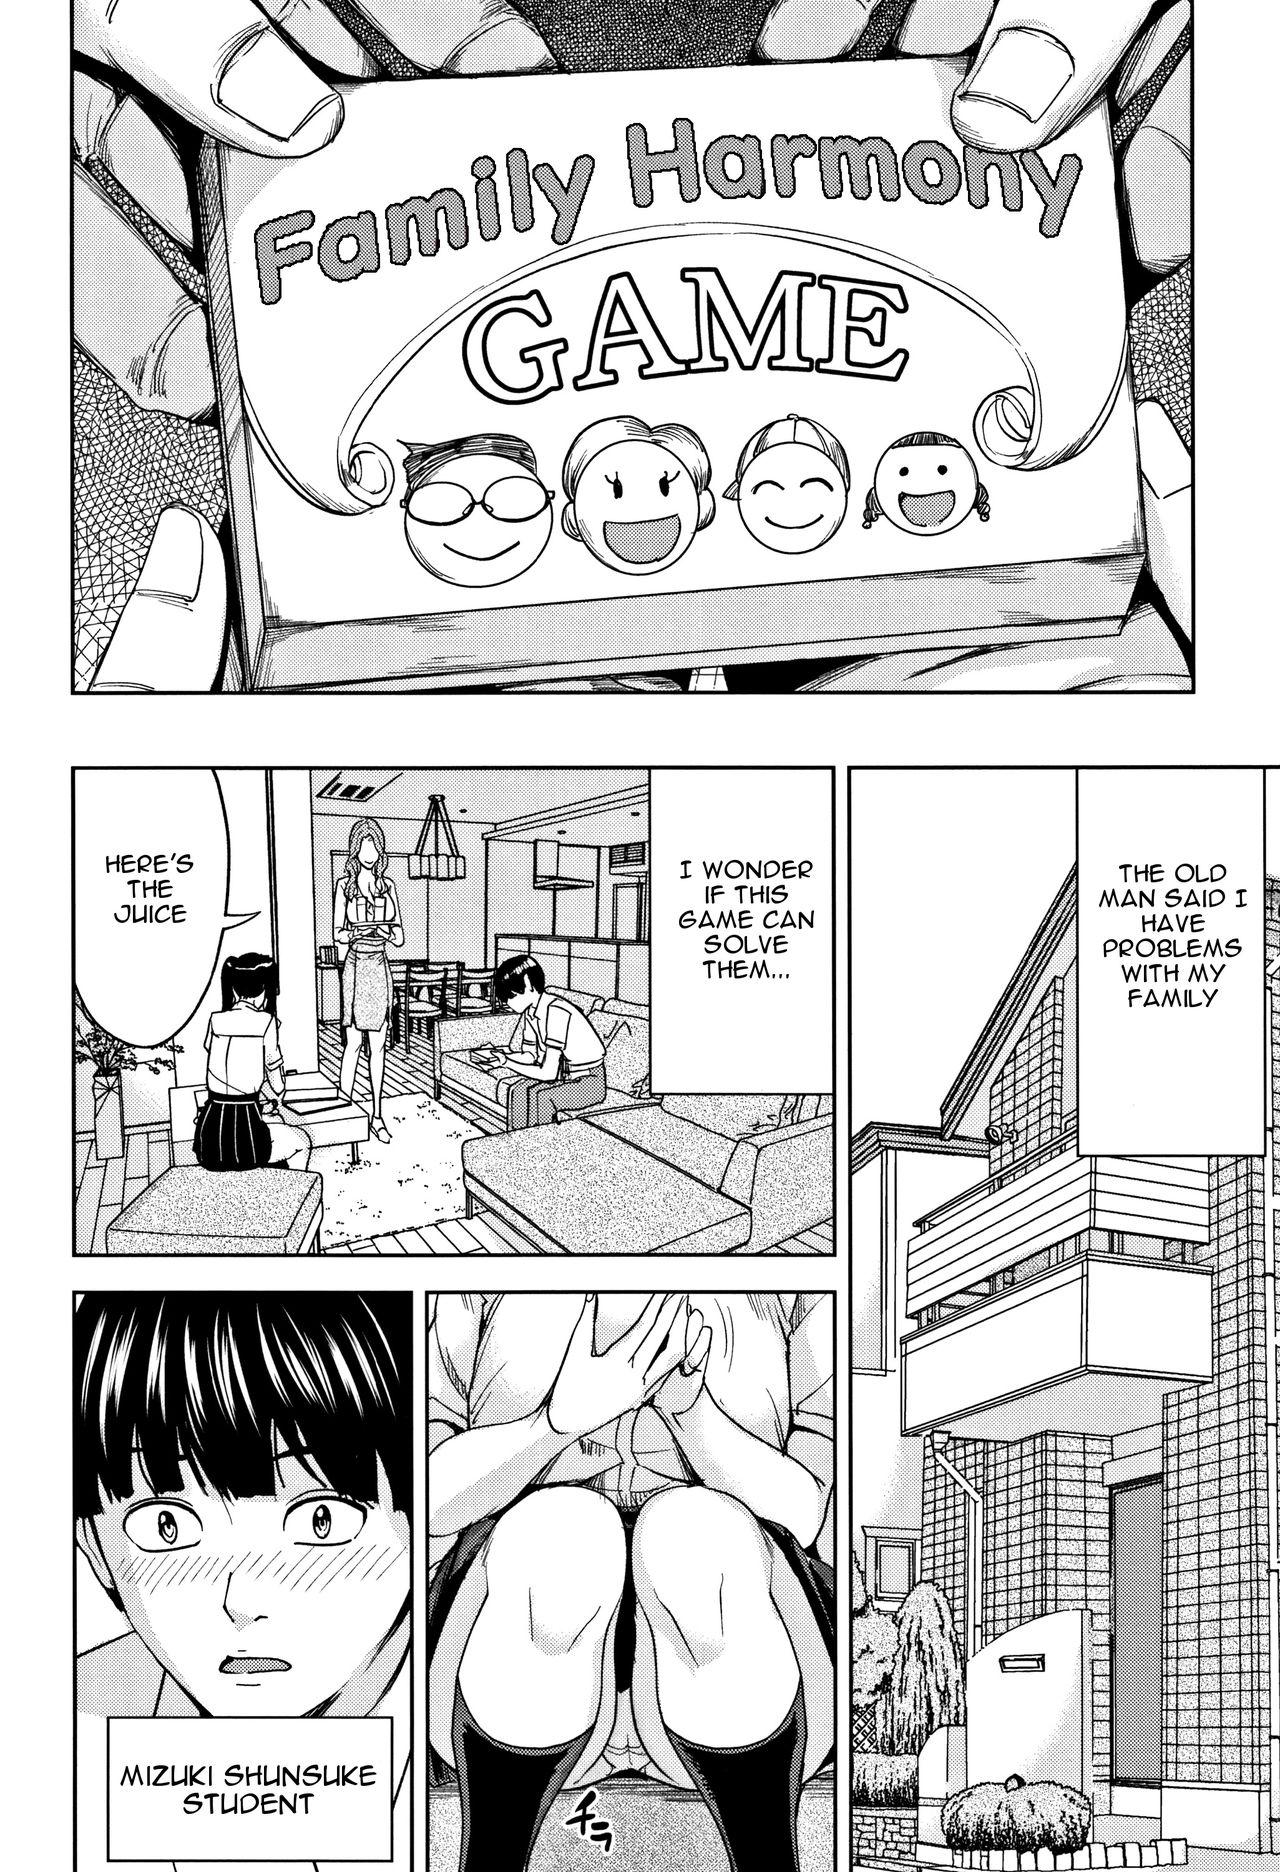 Orgy Kazoku Soukan Game - family Incest game Ch. 1 Hot - Page 9